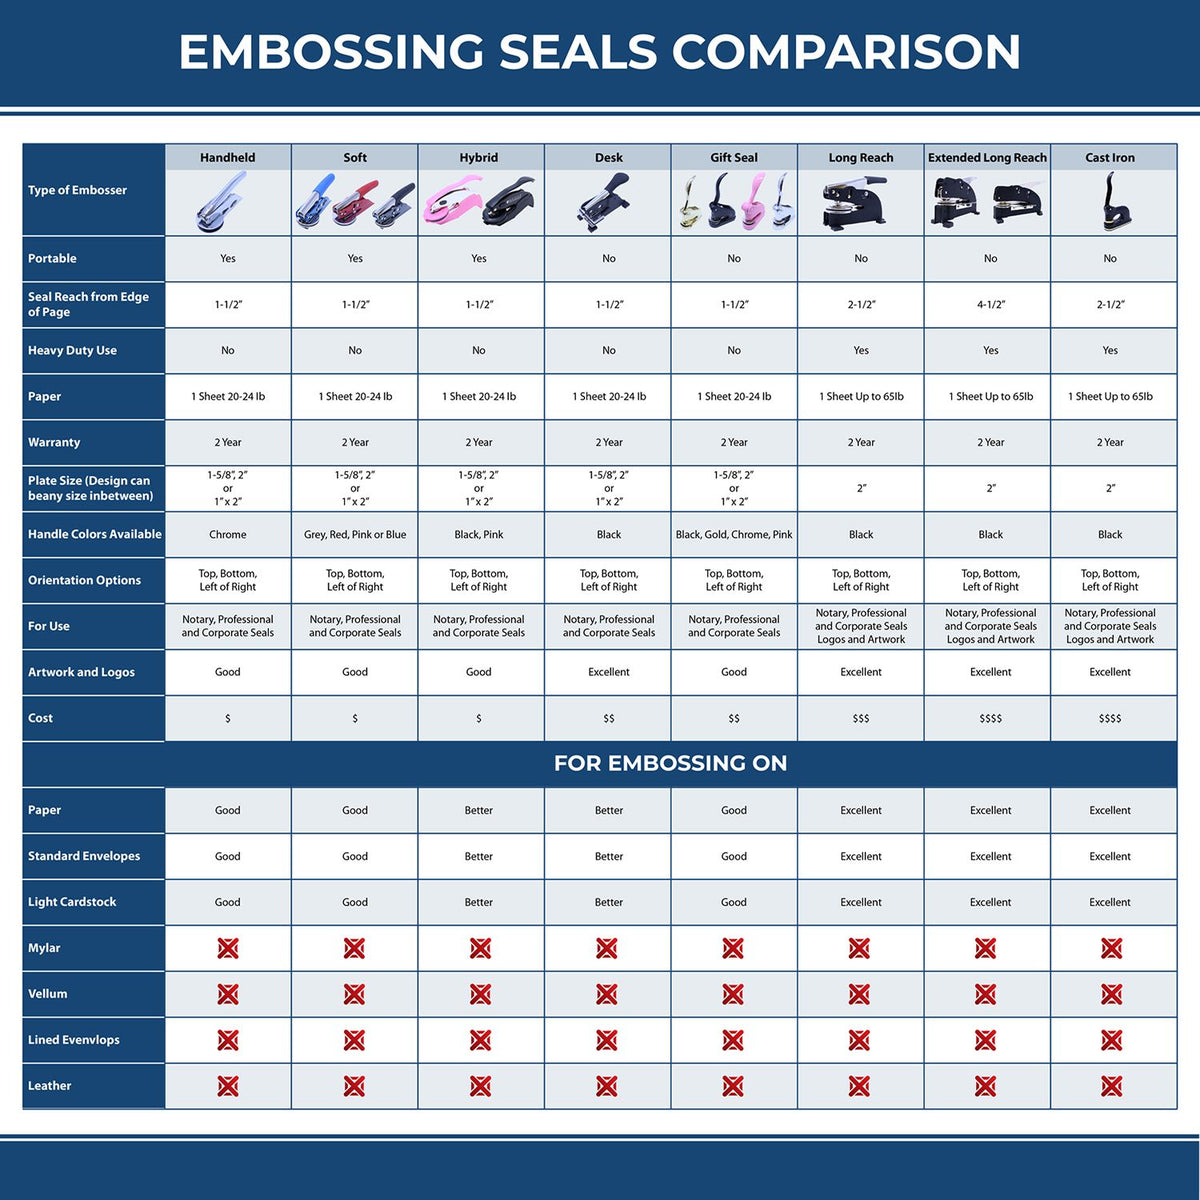 A comparison chart for the different types of mount models available for the Georgia Engineer Desk Seal.